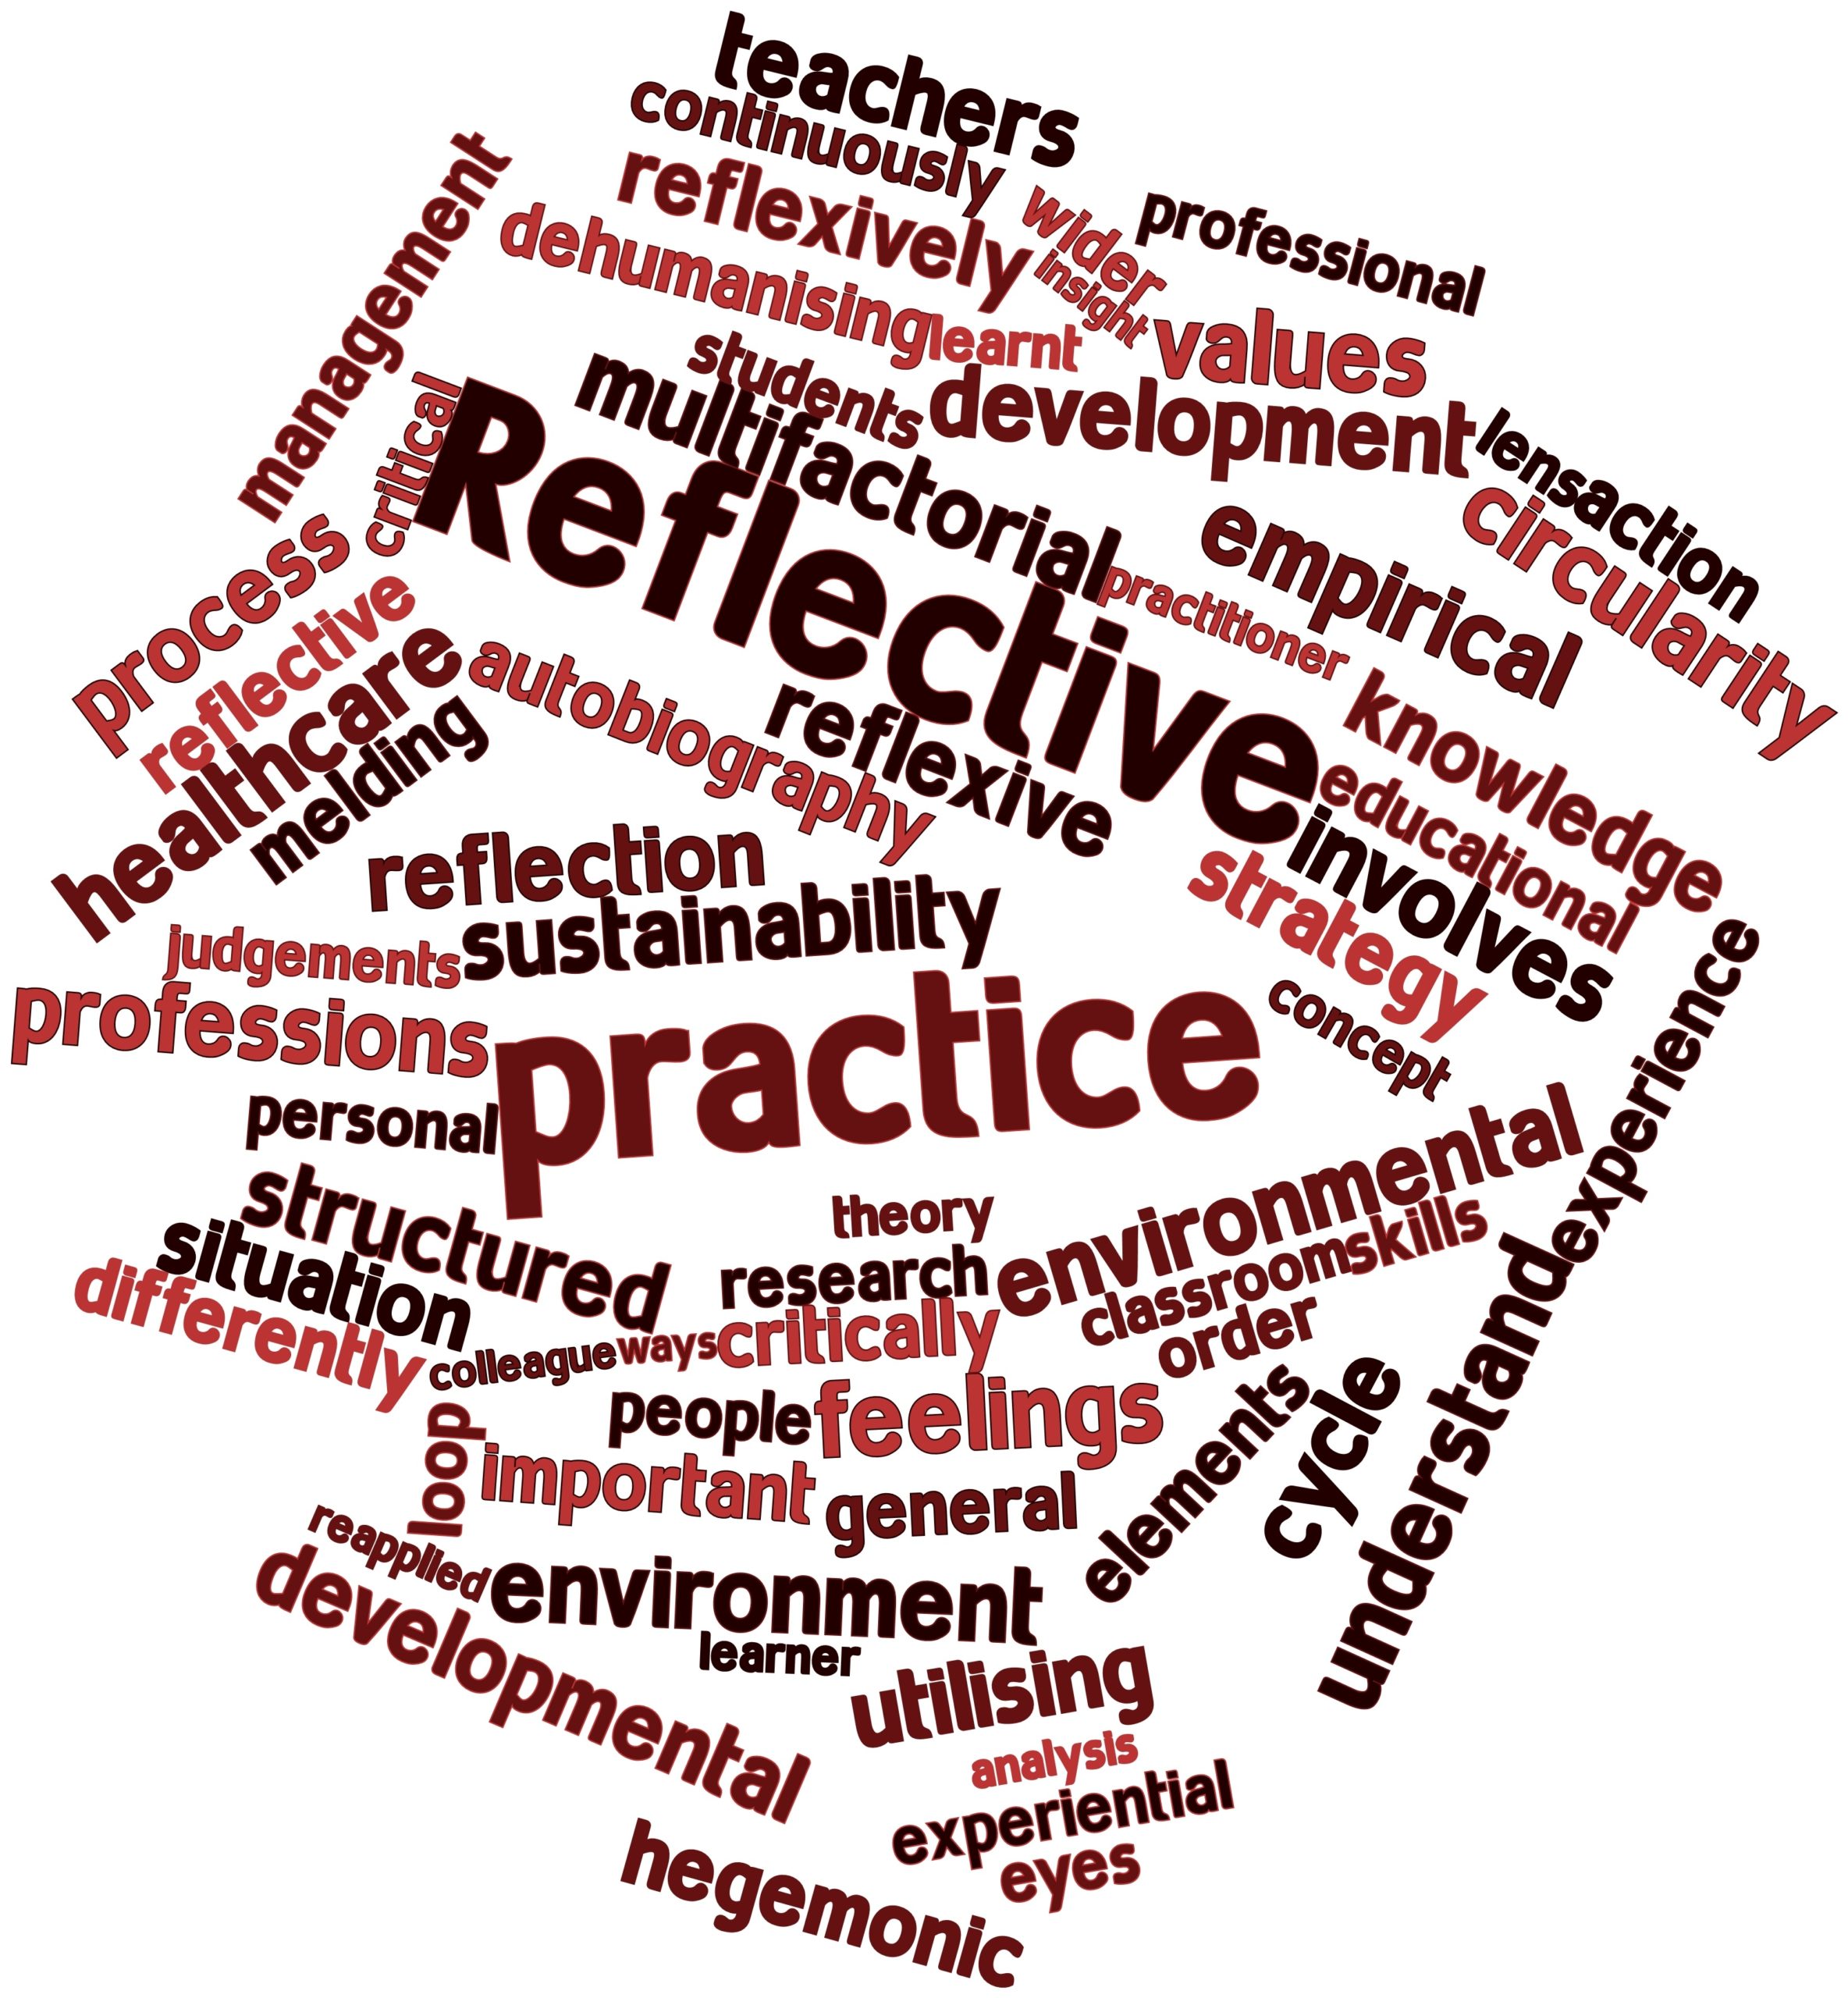 Featured image for “Reflecting on the Effectiveness of Reflective Practice”